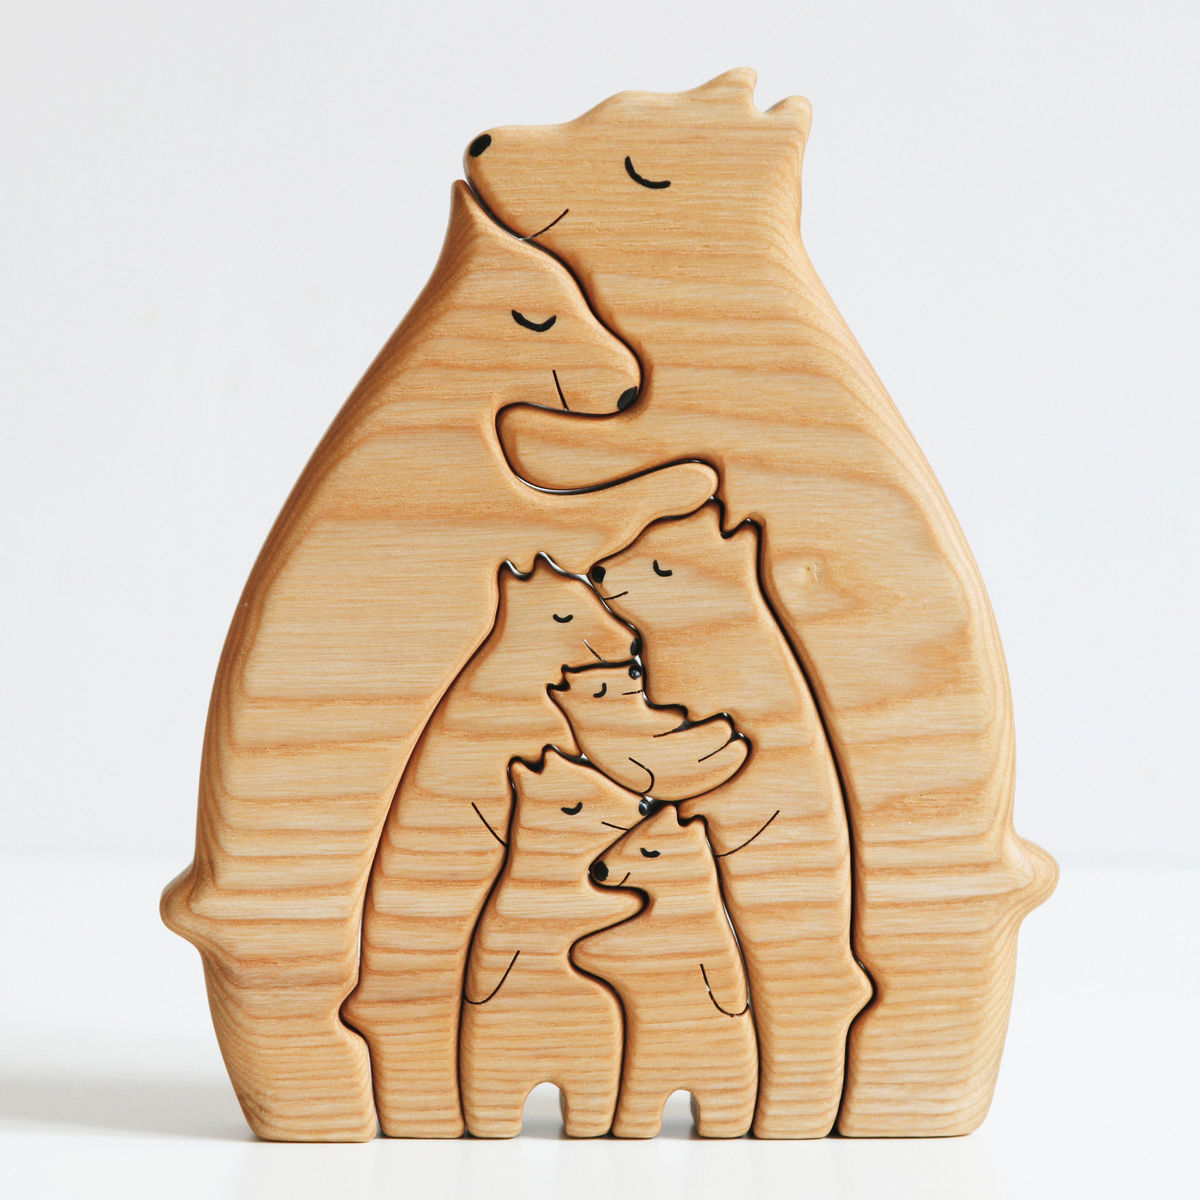 Wooden Bears family puzzle - Up to 6 Kids - Christmas Decor, Family Keepsake Gift, Home Decor_5